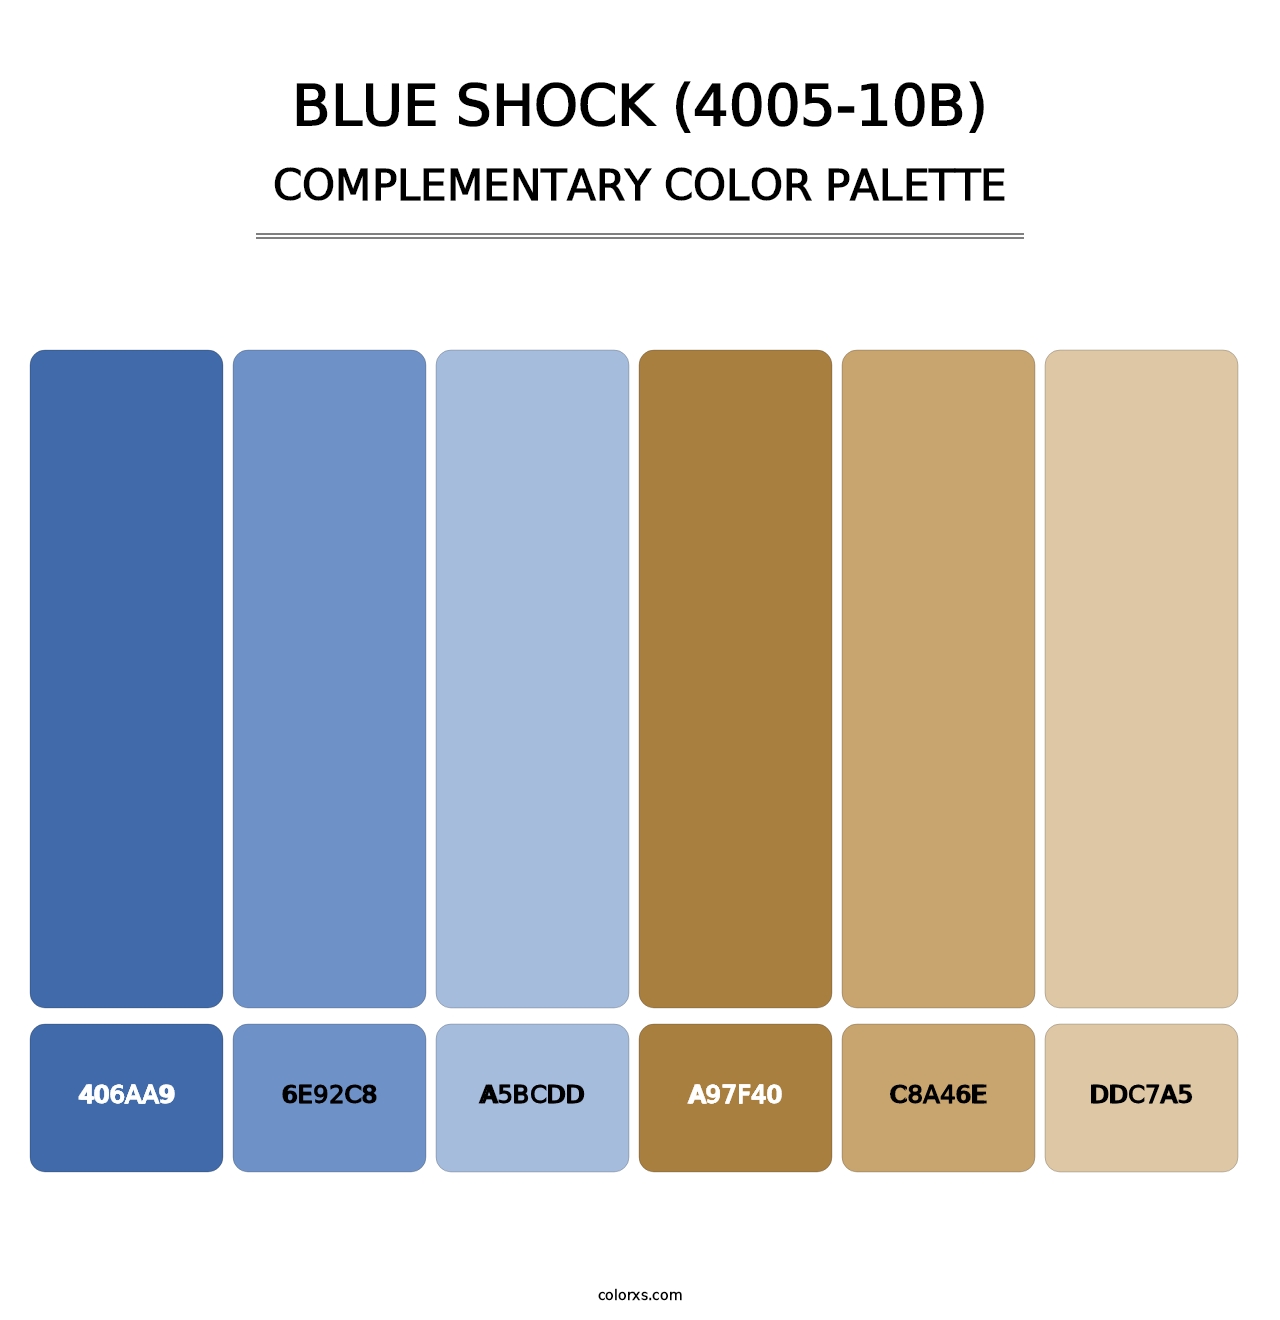 Blue Shock (4005-10B) - Complementary Color Palette